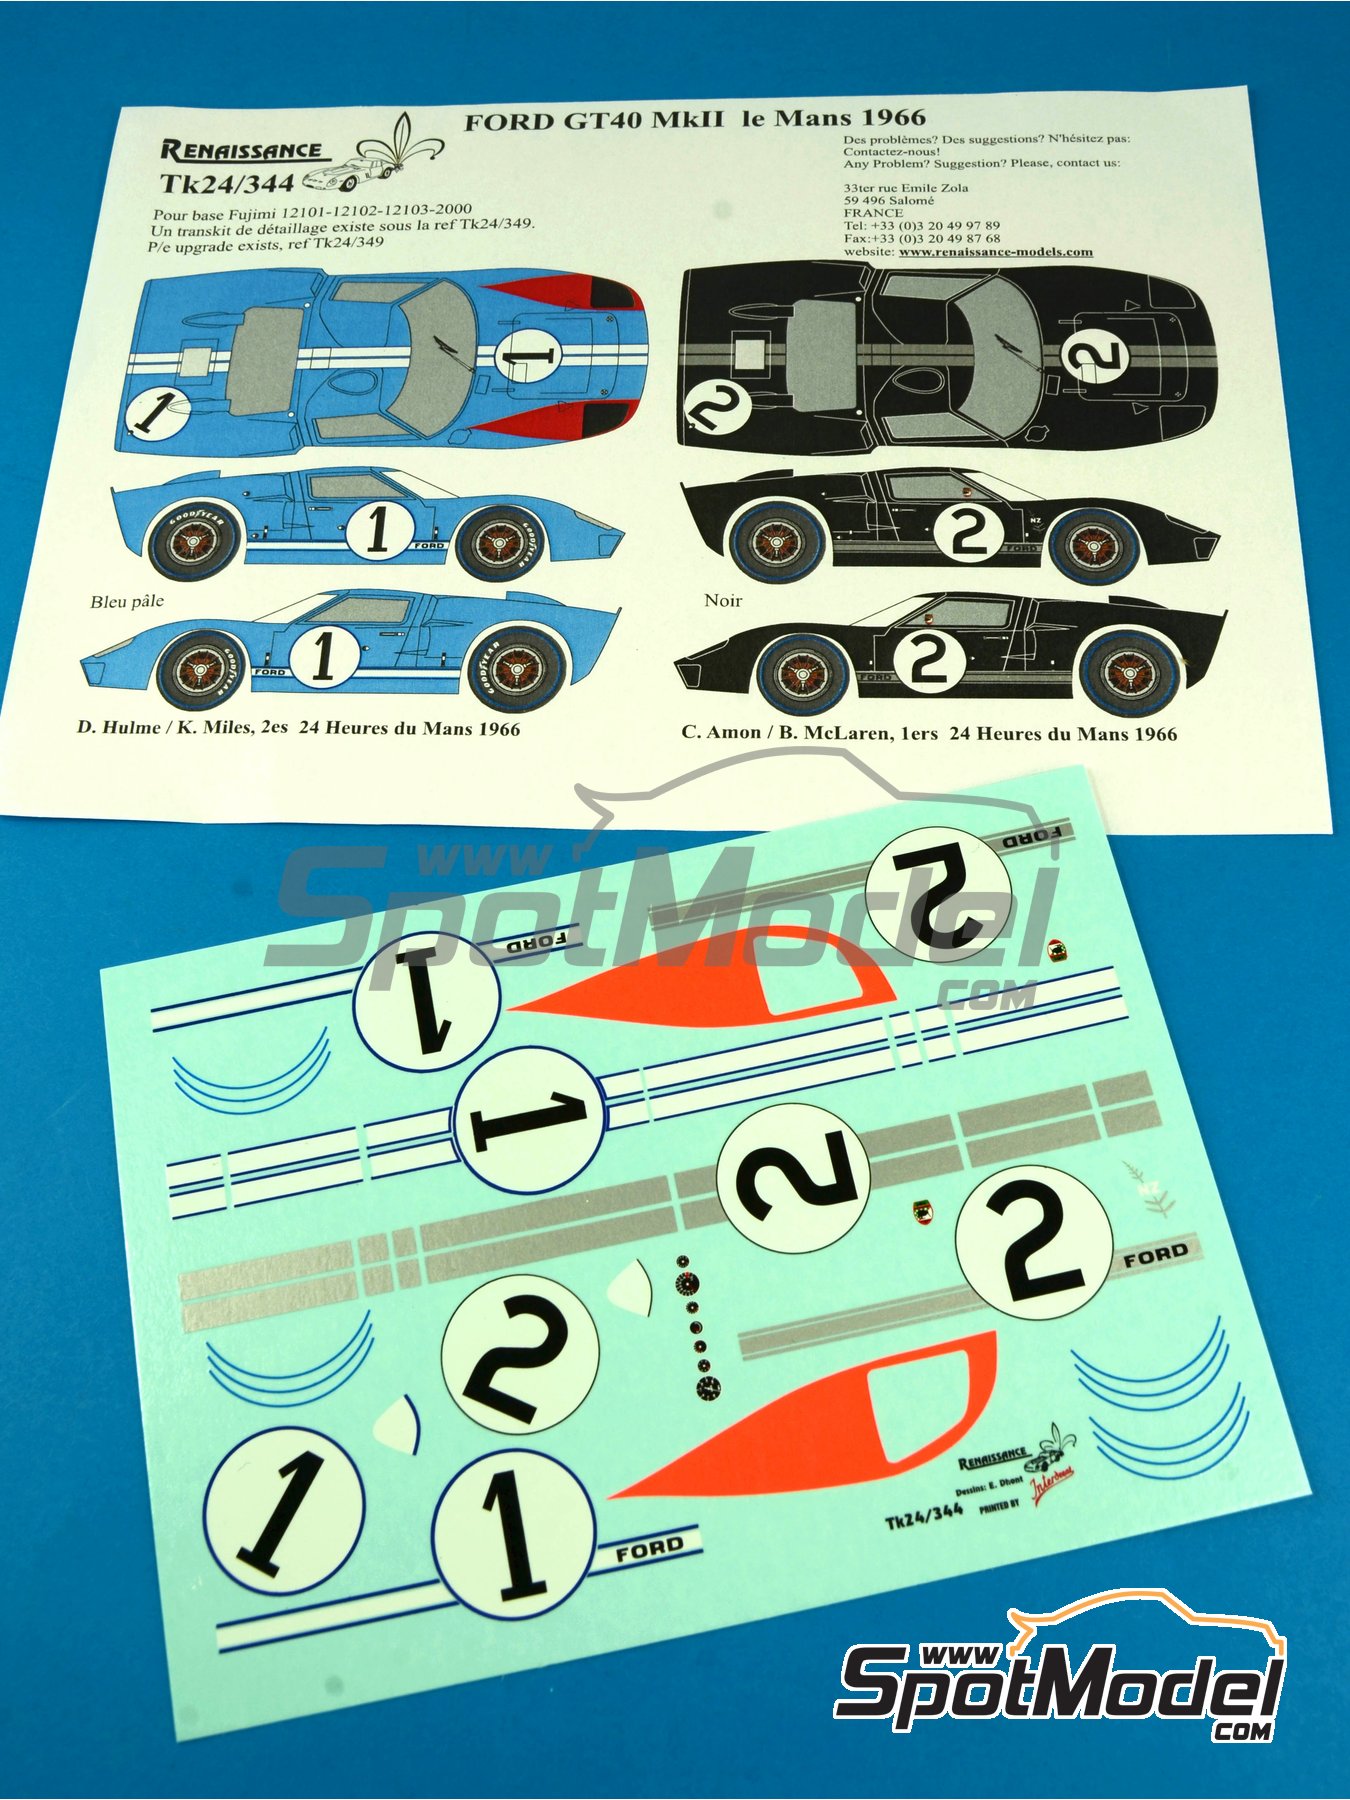 Décal Ford GT40 Le Mans Test 1969 58 1:32 1:43 1:24 1:18 64 87 MkII... 